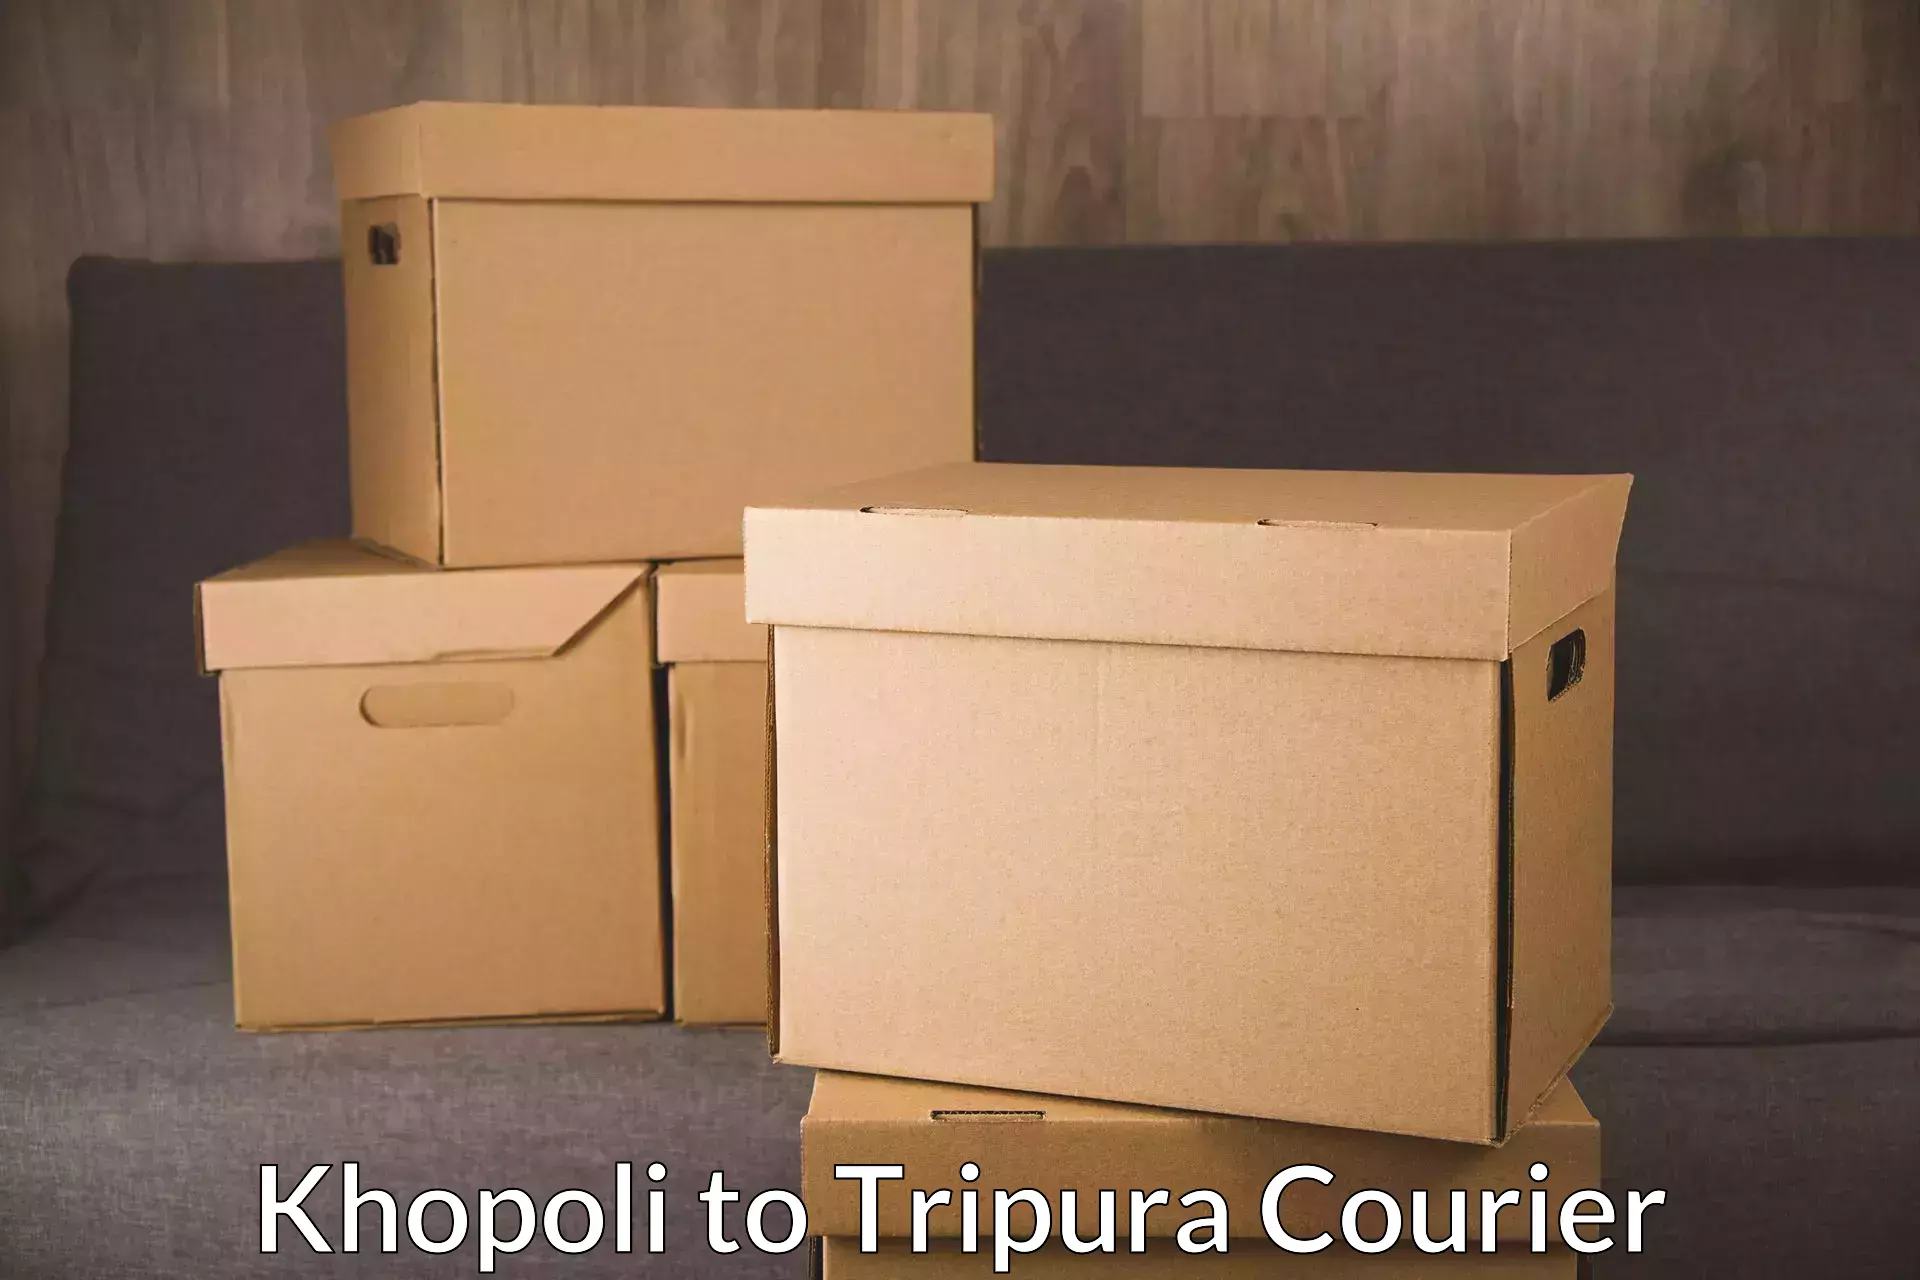 Cost-effective courier solutions Khopoli to Udaipur Tripura